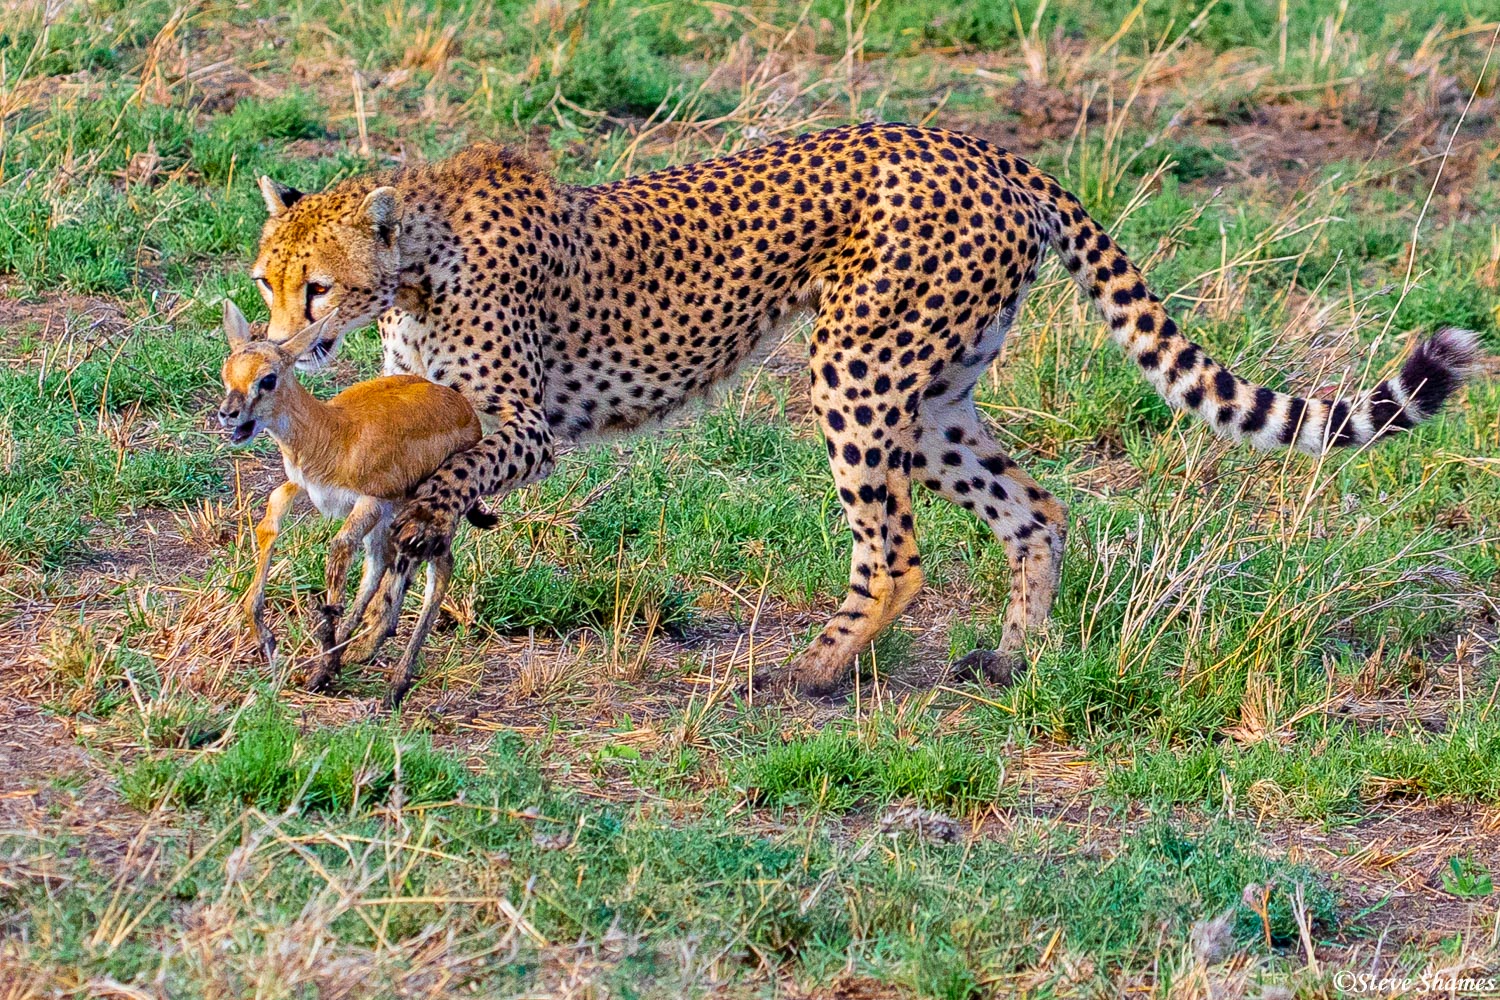 Here's an unusual scene -- a mother cheetah herding the Thompson's gazelle to present to her cub for hunting practice.